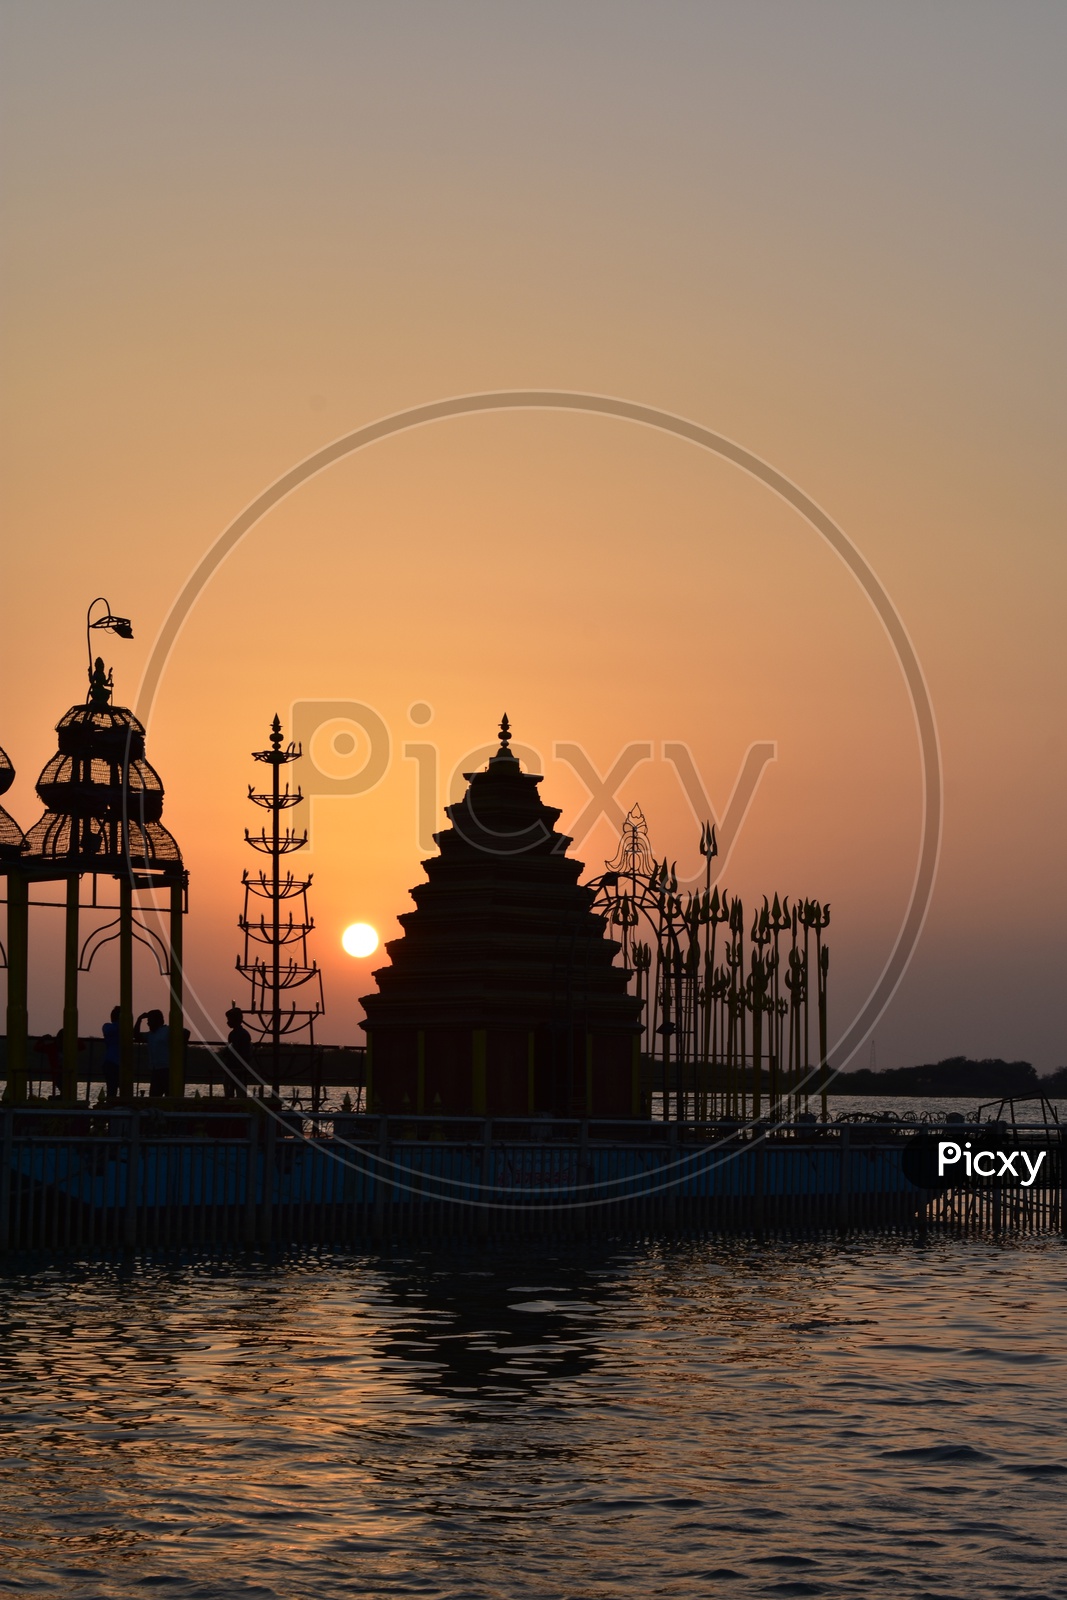 Sunset view of Pavithra Sangamam Ghat